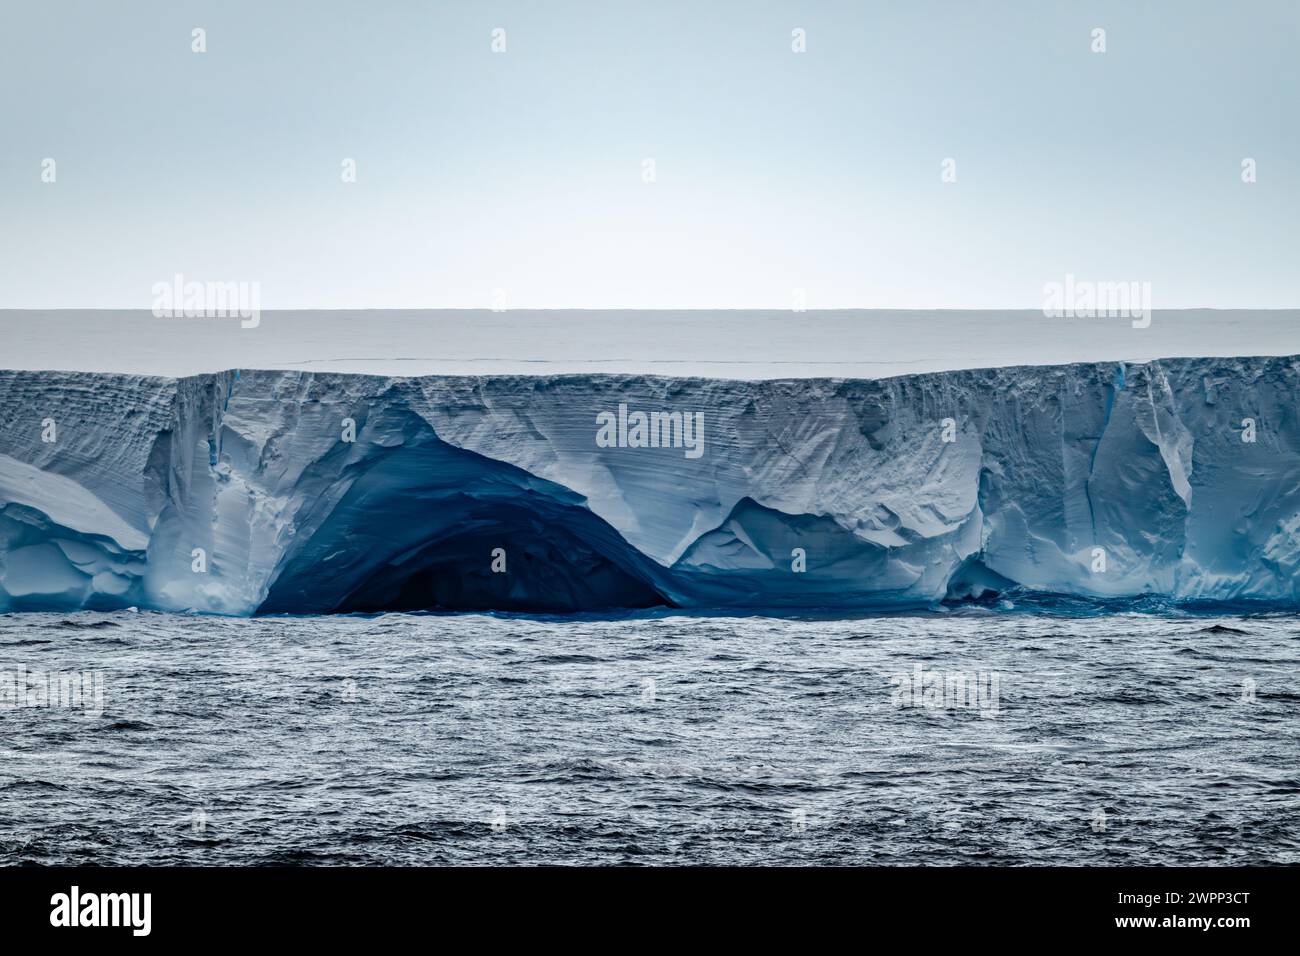 A23a, the largest iceberg in the world, off the coast of Antarctica. Stock Photo